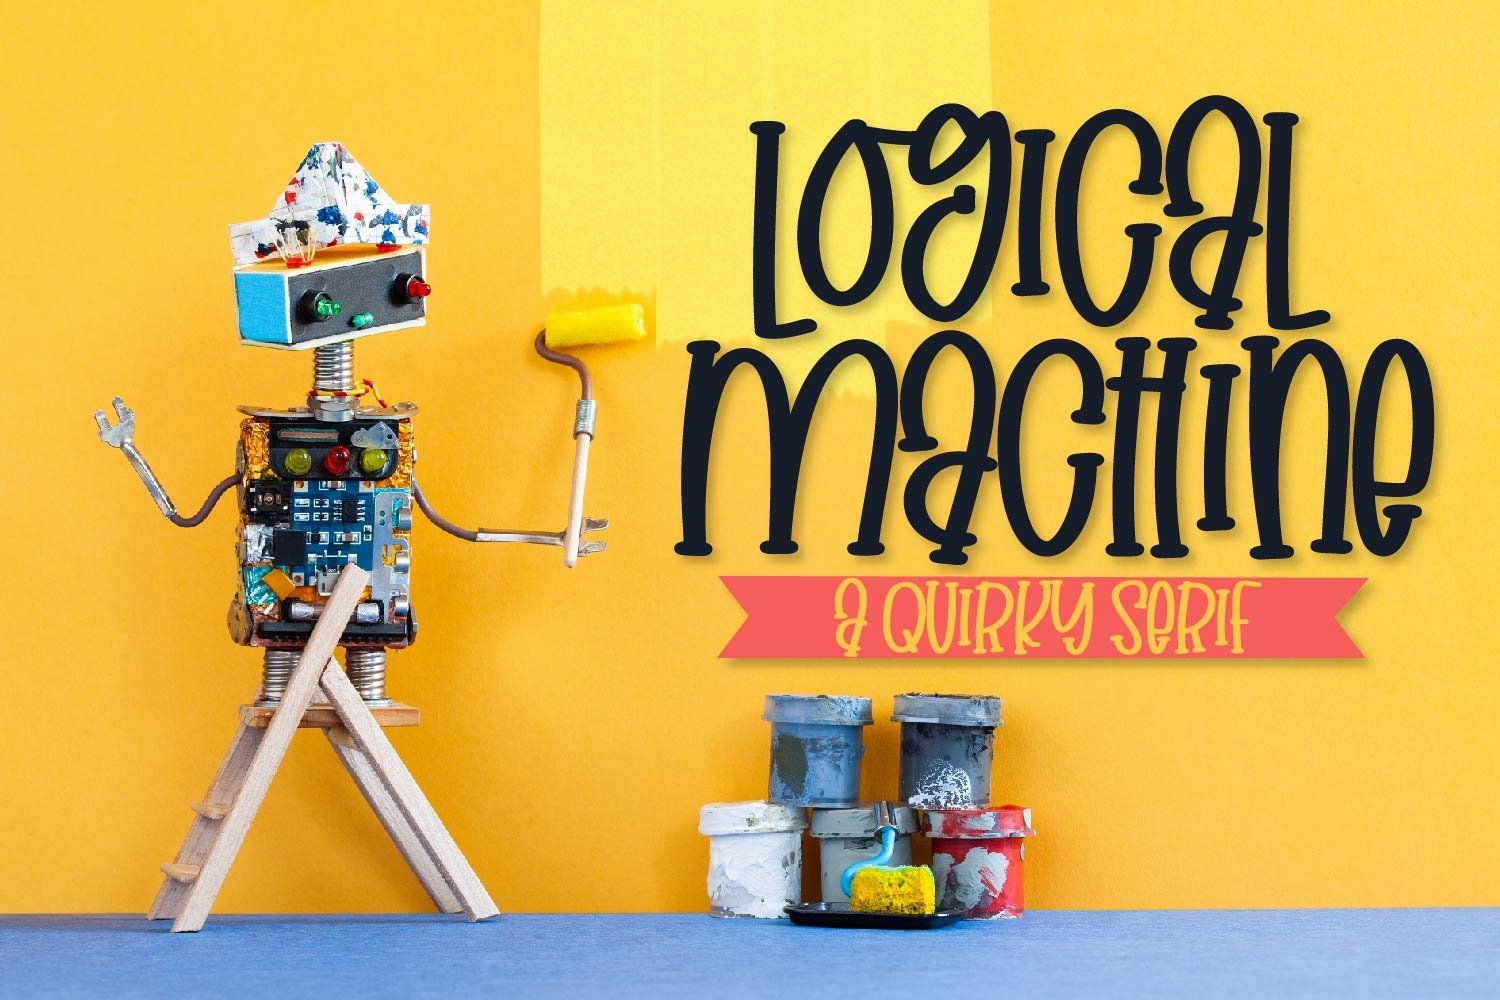 Logical Machine - A Quirky Serif cover image.